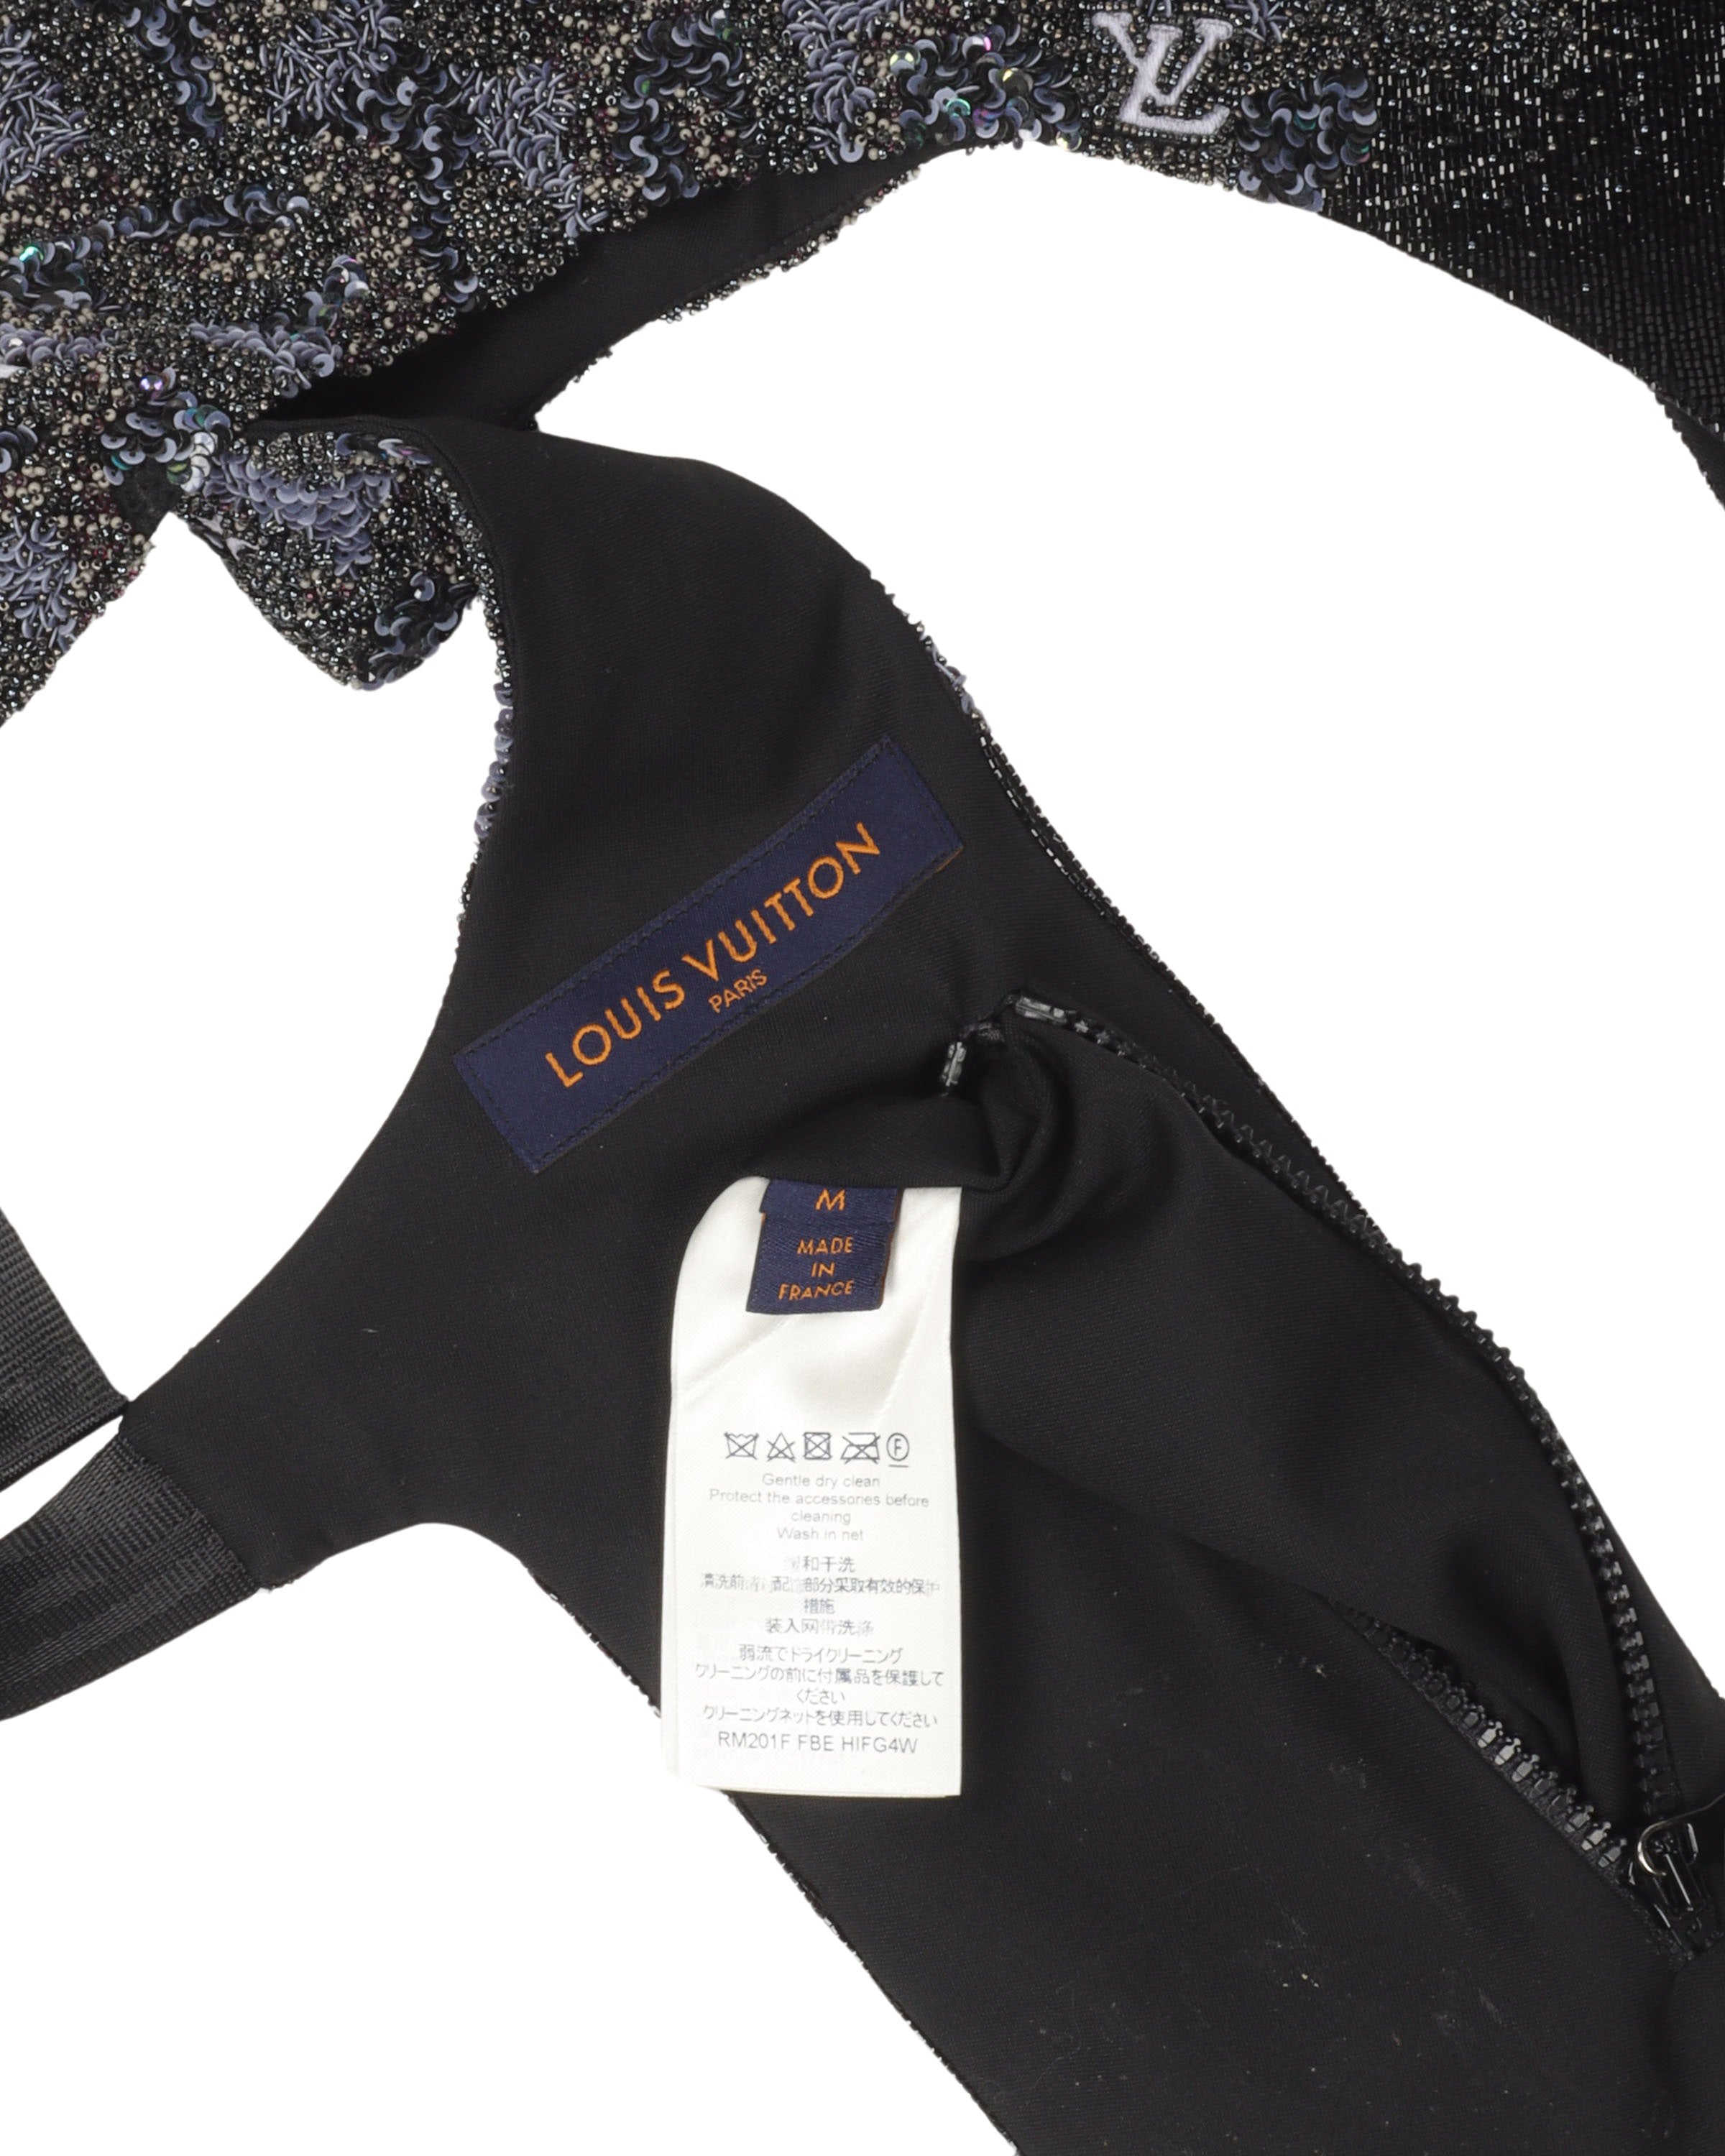 Louis Vuitton black sequined Harness Cut Away Vest worn by